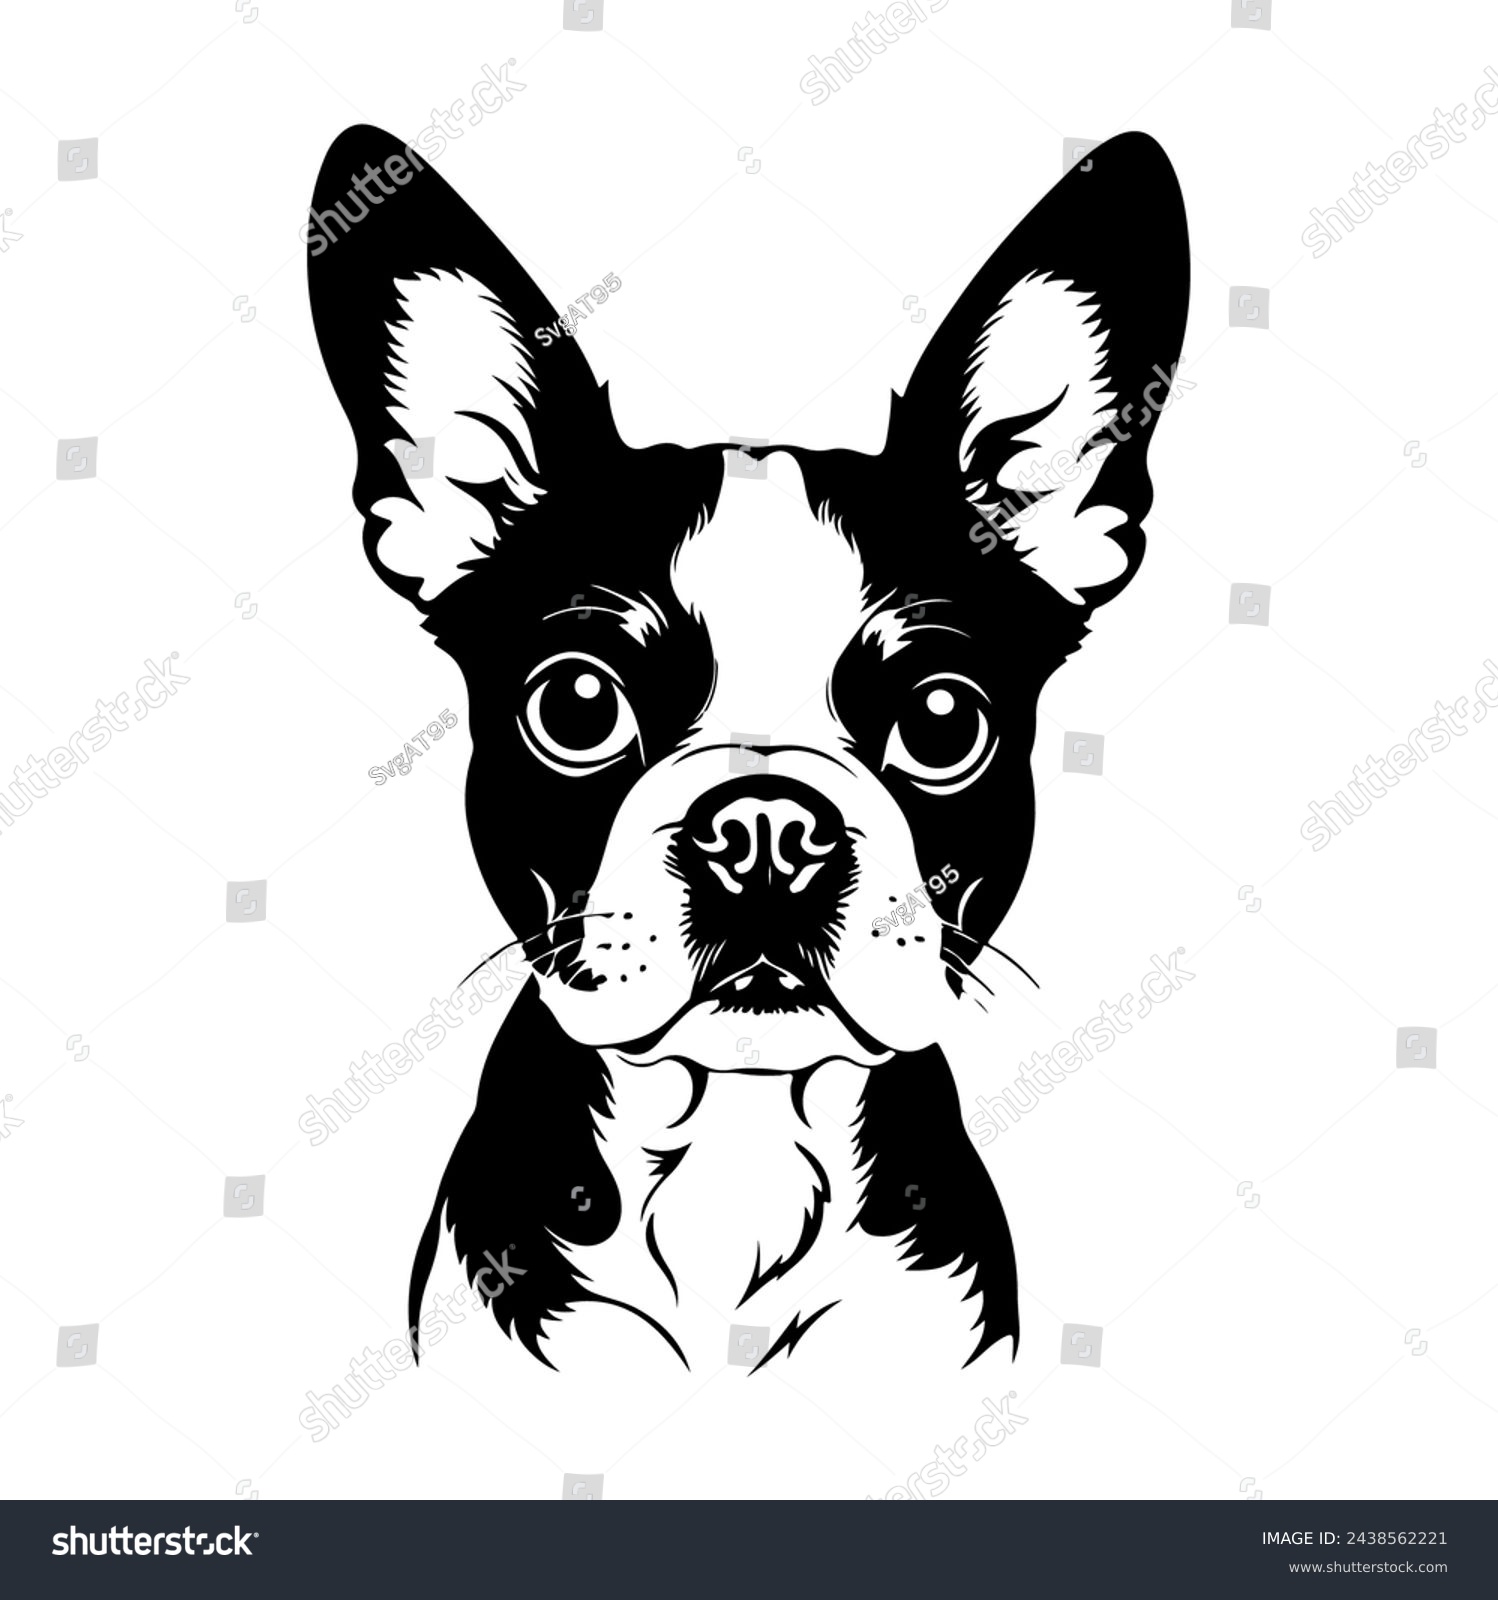 SVG of Portrait of a Boston Terrier Dog Vector isolated on white background, Dog Silhouettes svg